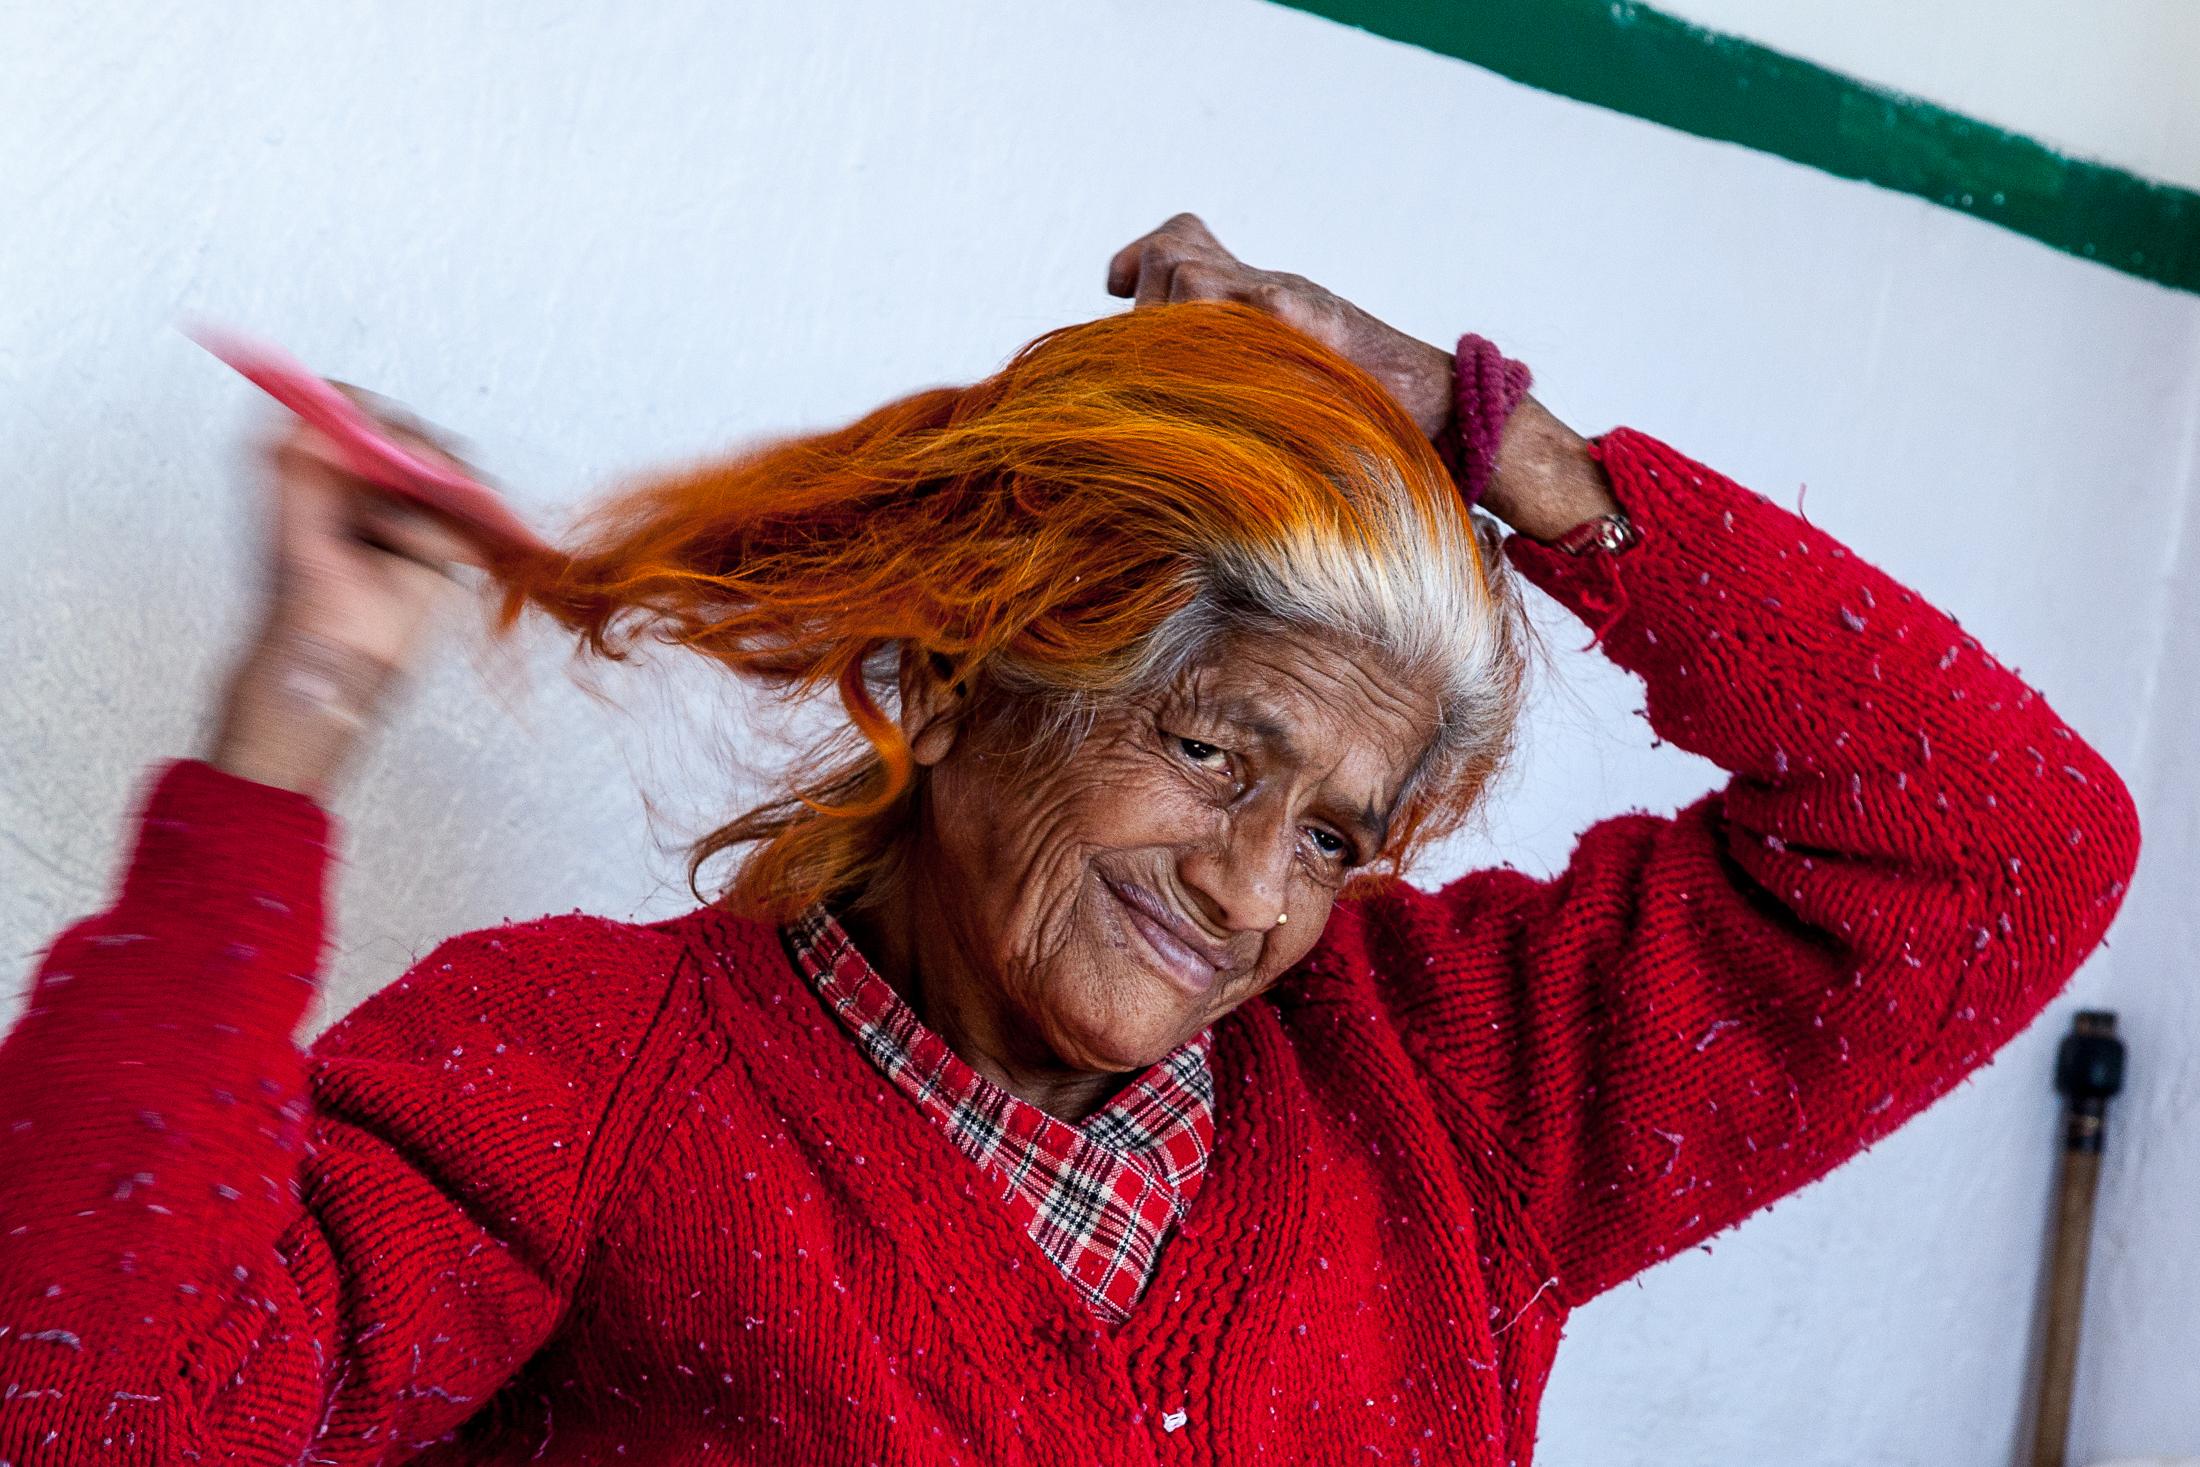 The Forgotten - LELE, NEPAL - JANUARY 24: A patient affected by leprosy...